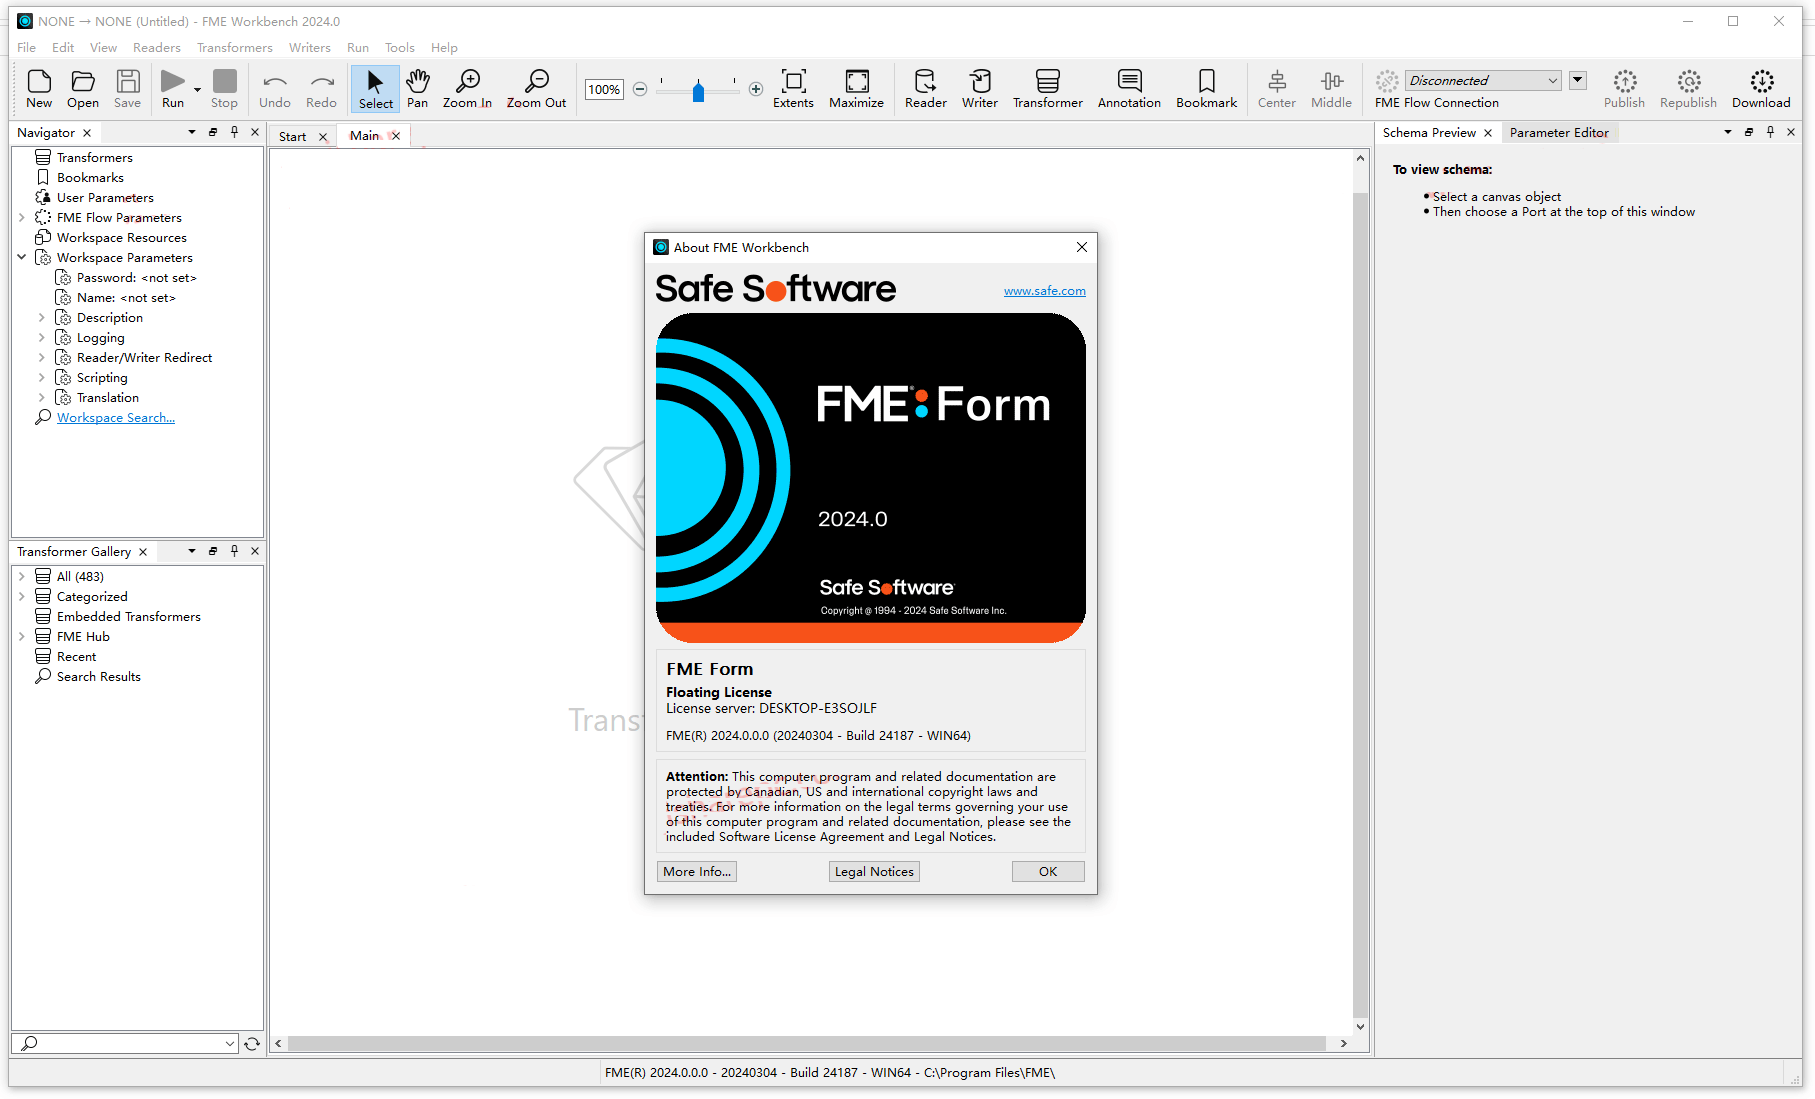 Working with FME Form Desktop 2024.0 full license